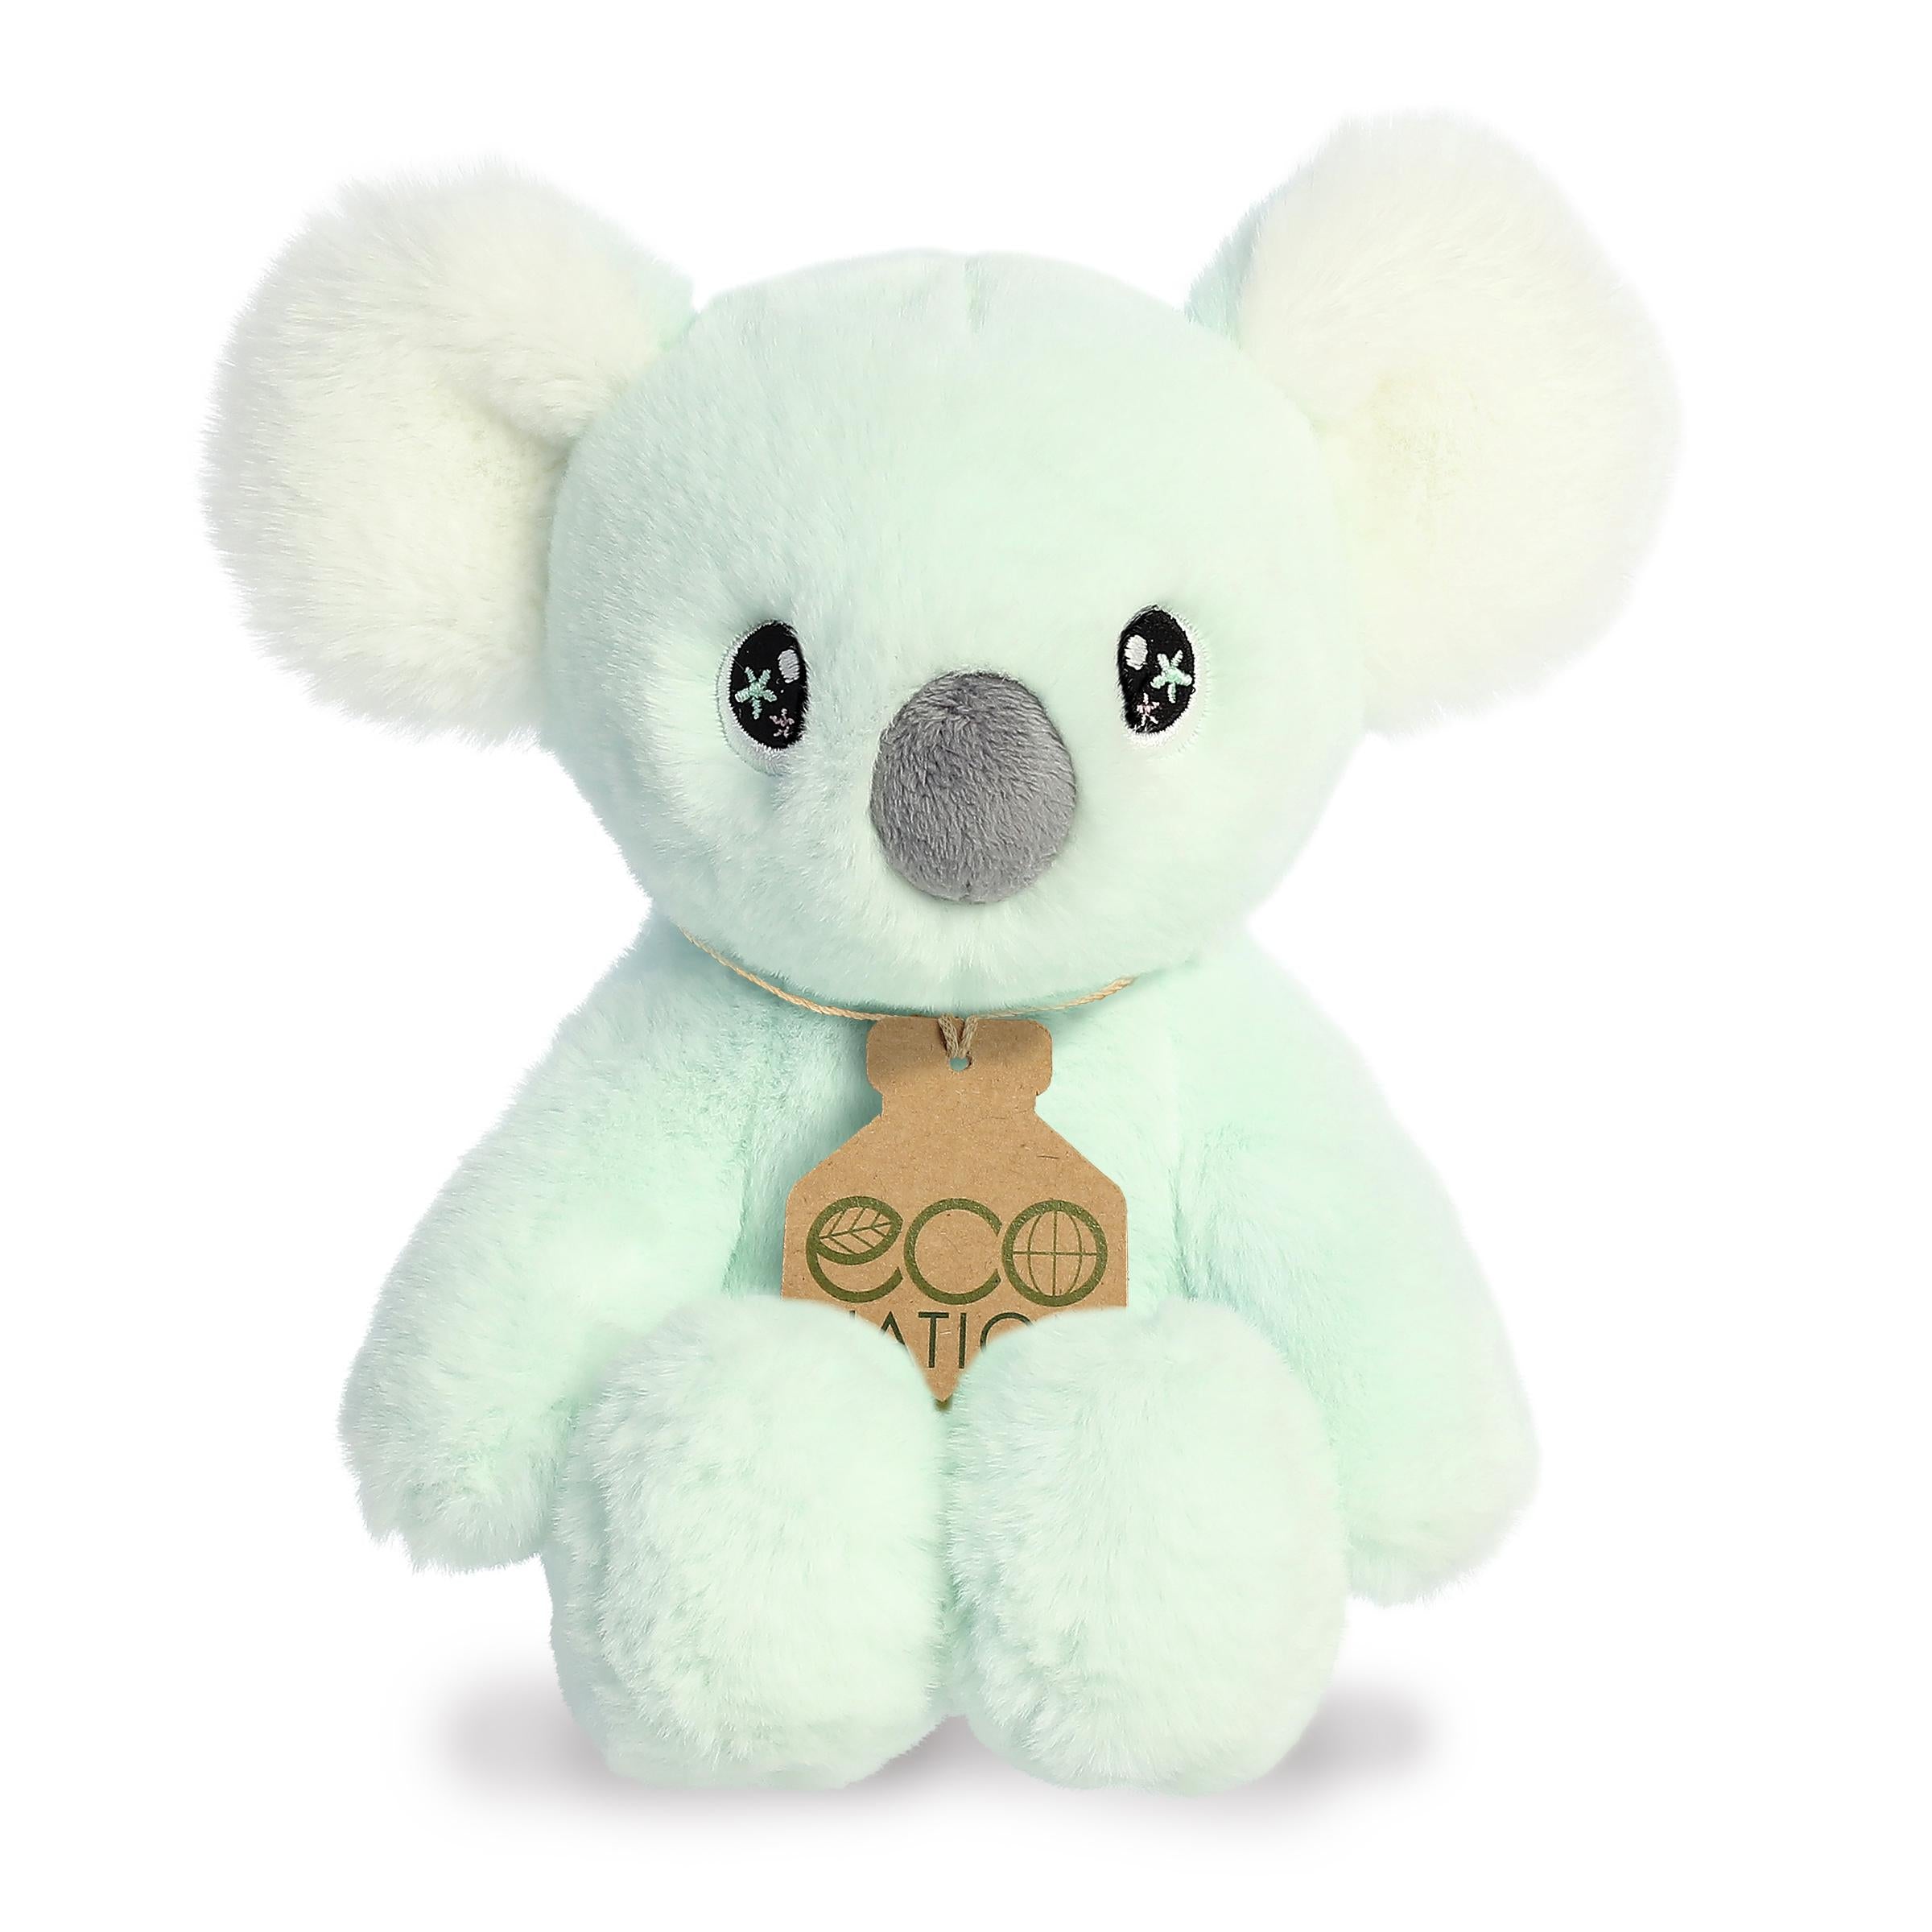 A charming koala plush with a faint green hue, adorable sparkling embroidered eyes, and an eco-nation tag around its neck